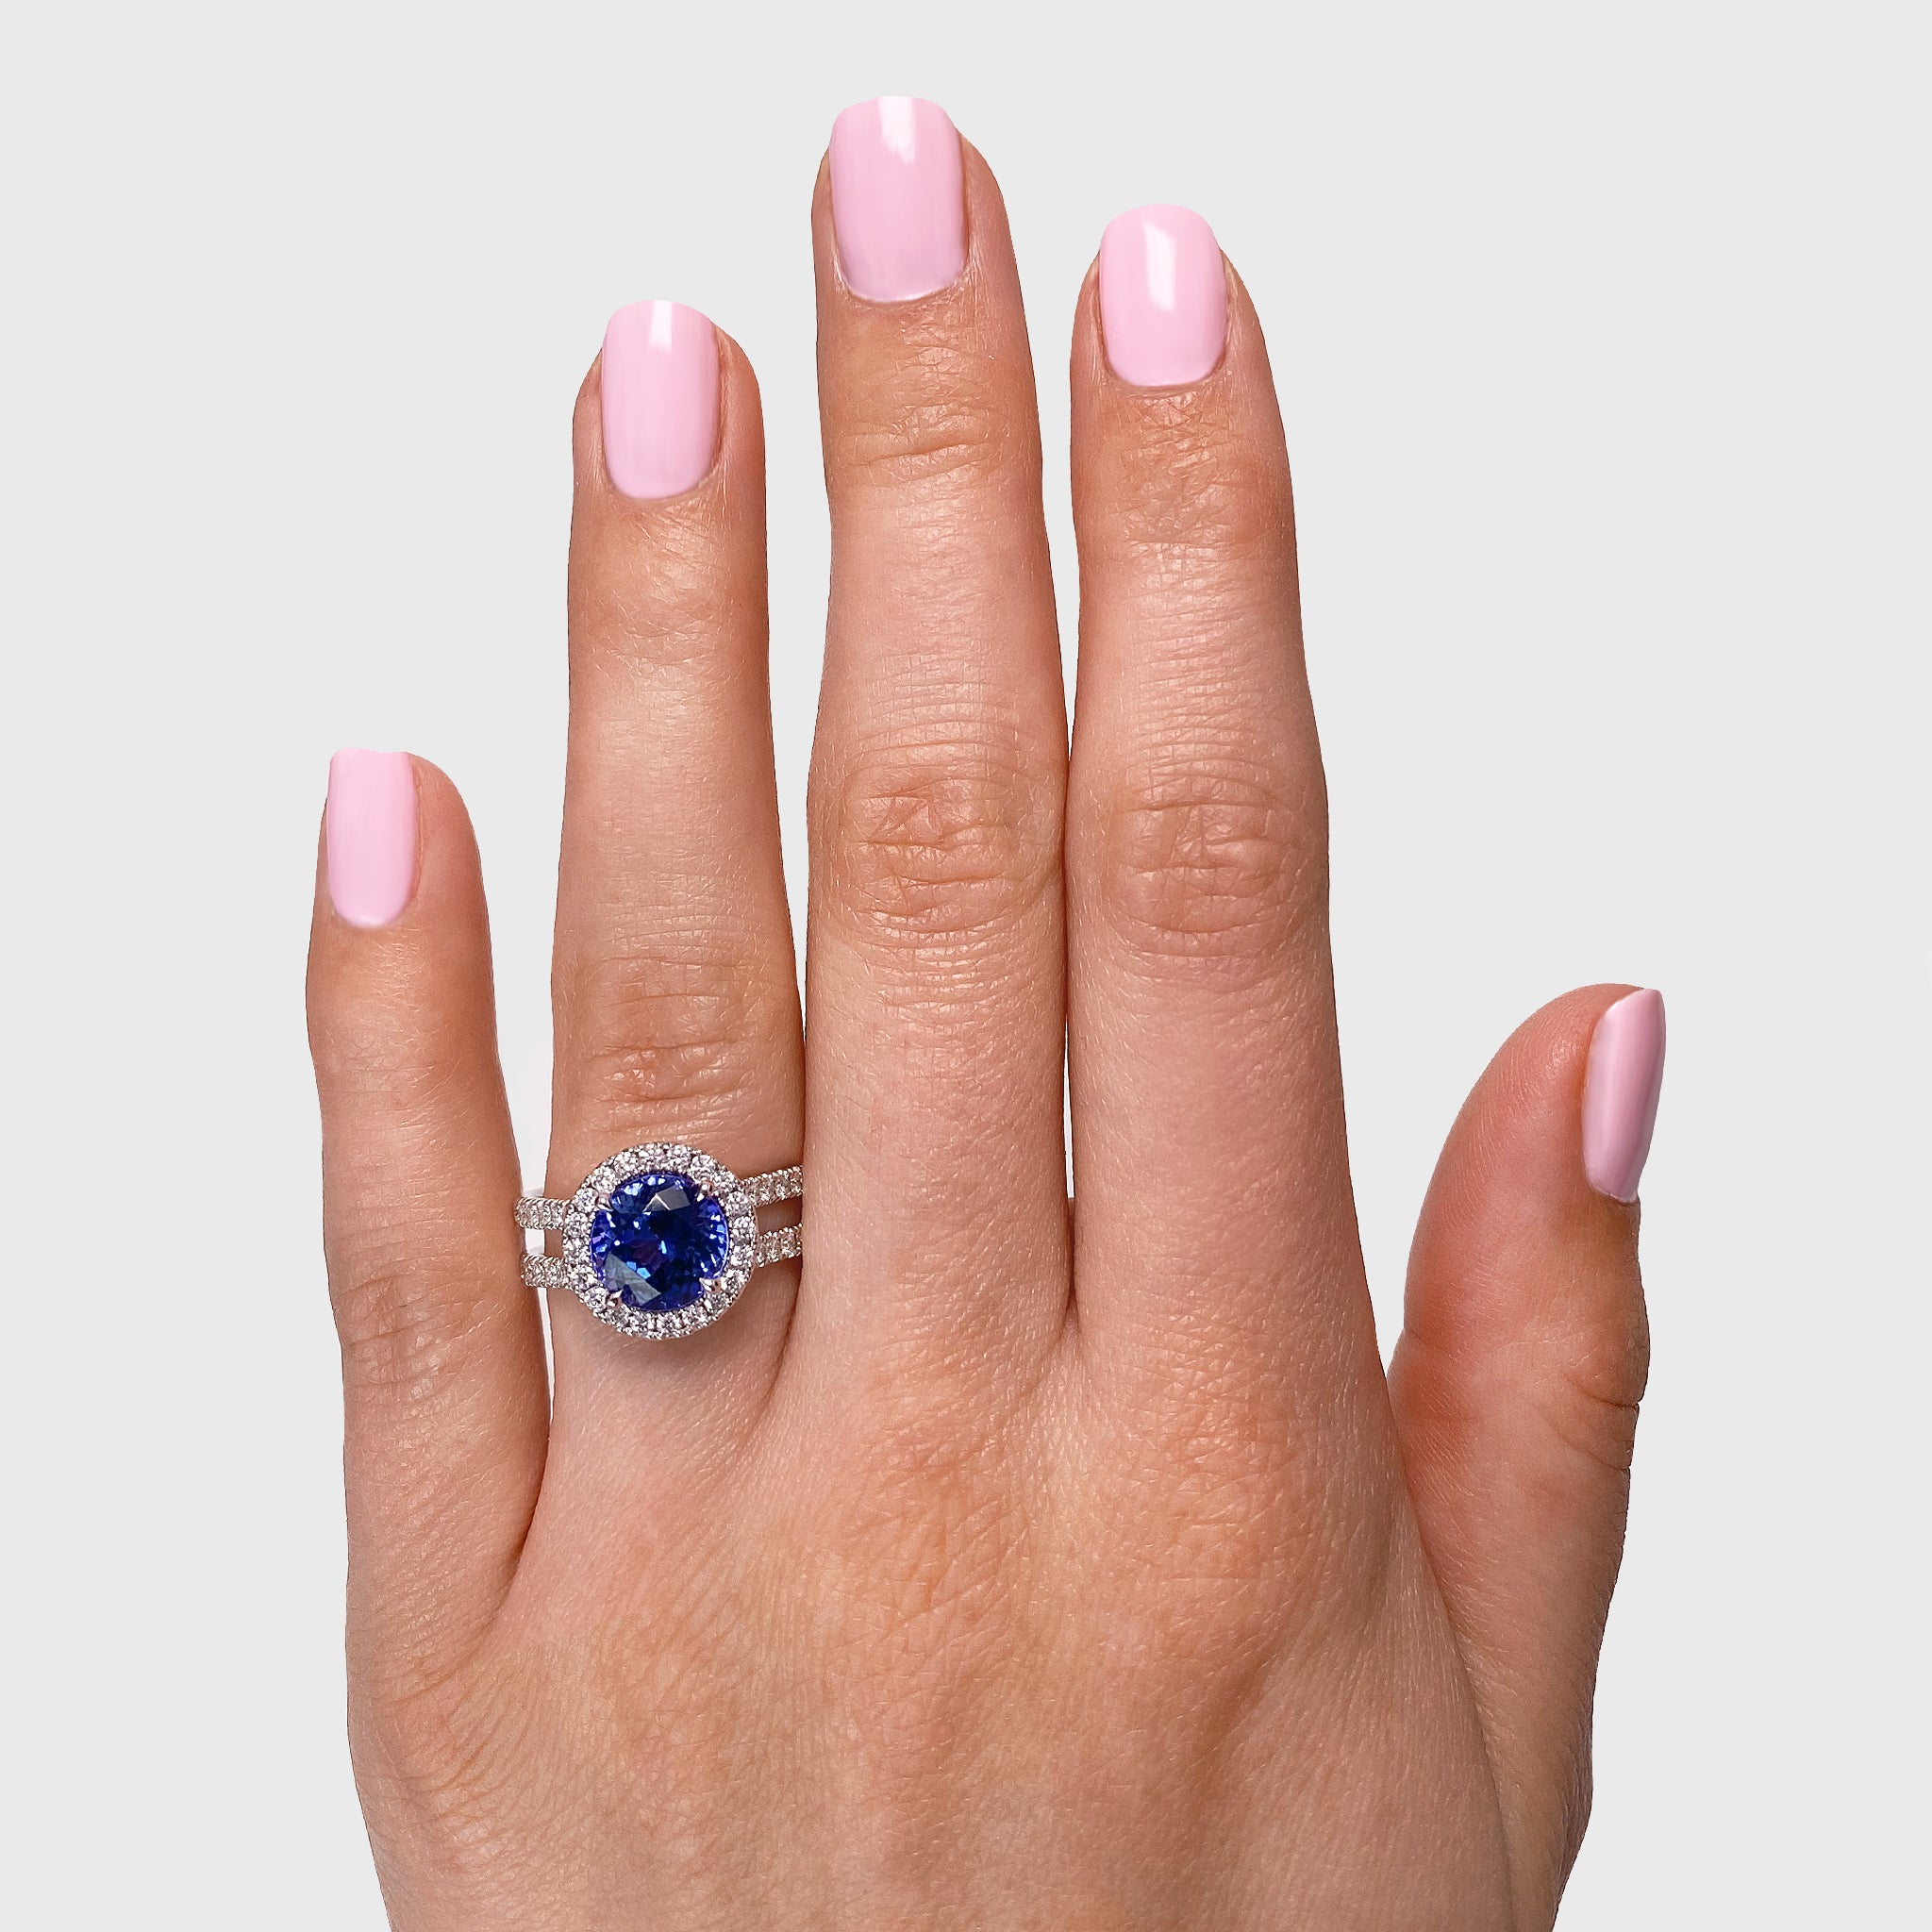 Shimansky - Women Wearing the Tanzanite and Diamond Double Microset Halo 2.50ct ring crafted in 14K White Gold